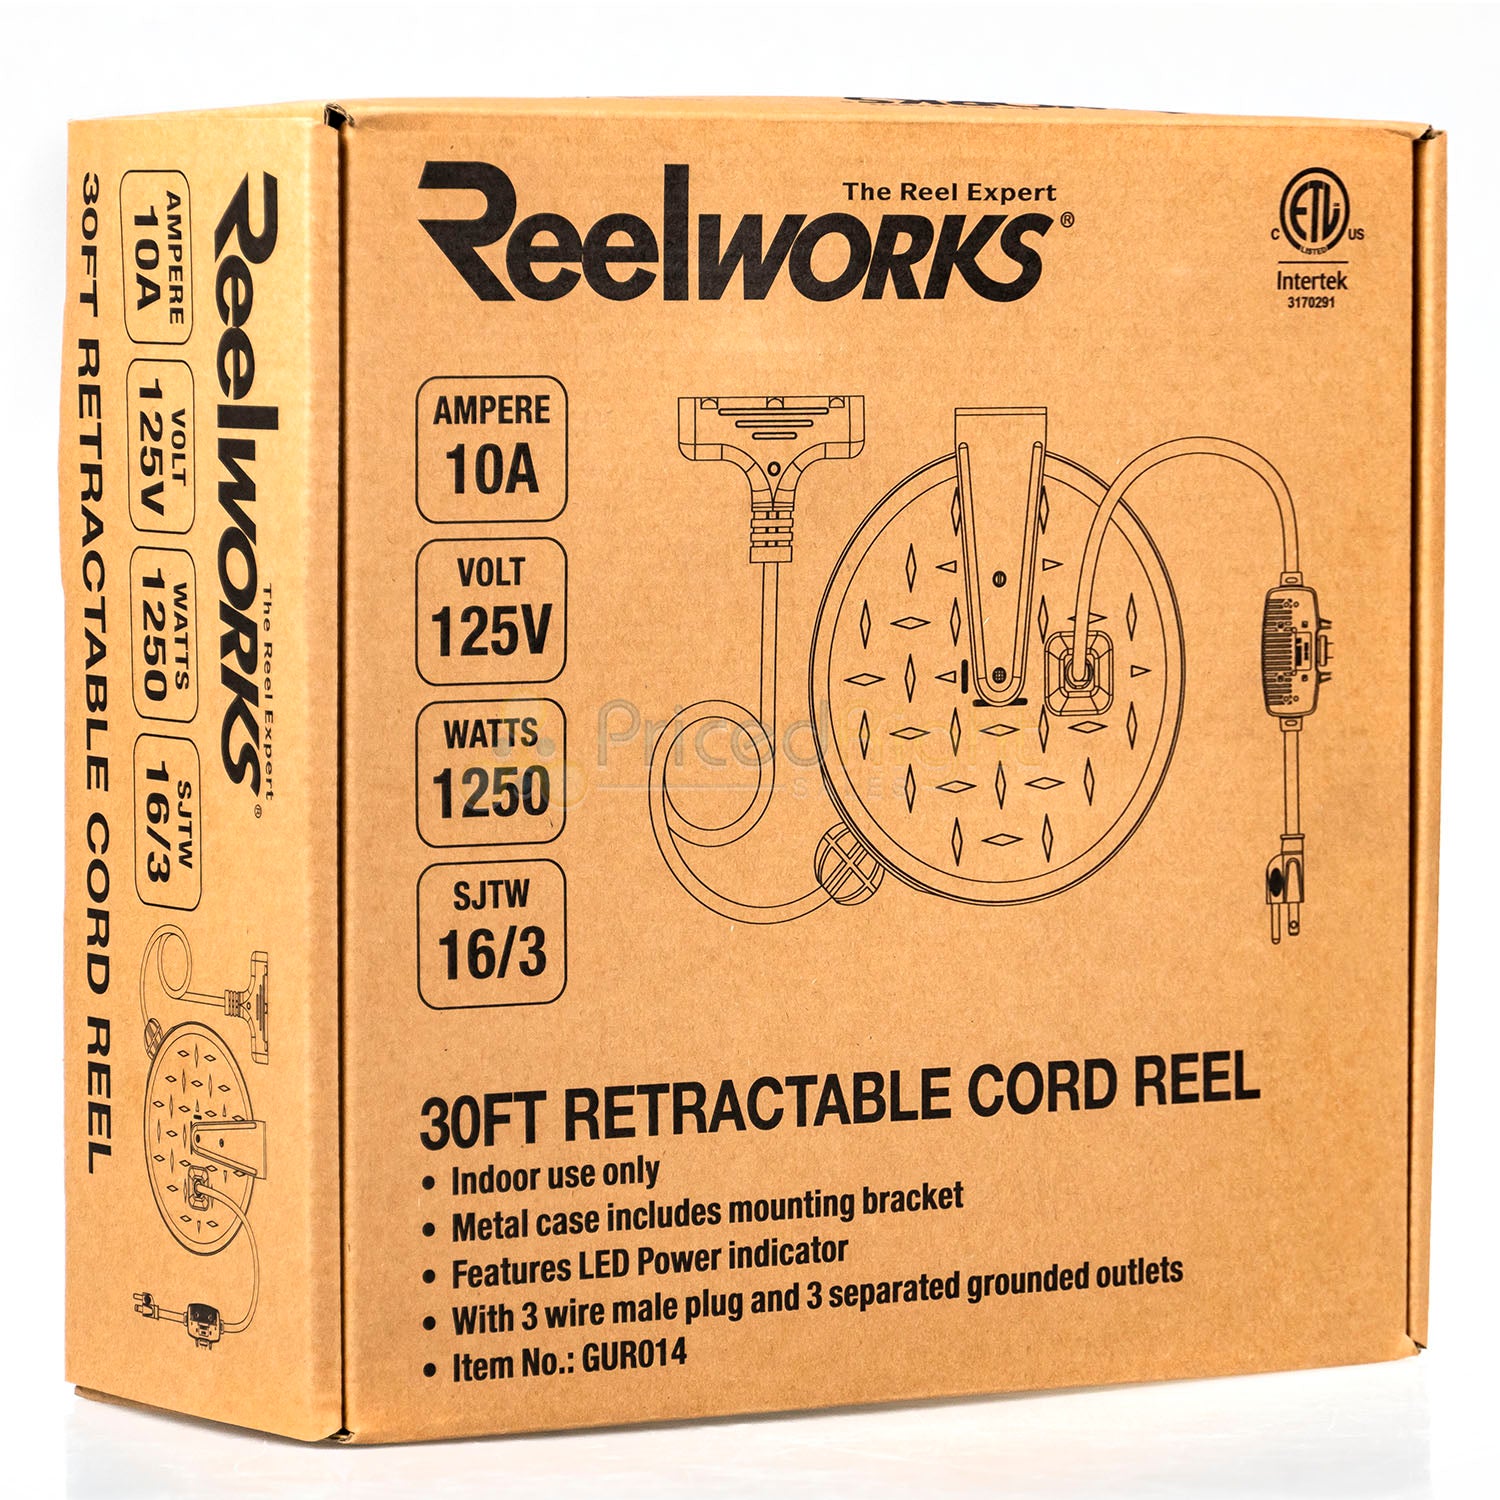 30 Ft Retractable Extension Cord Reel 3 Outlets 16/3 SJTW Cord